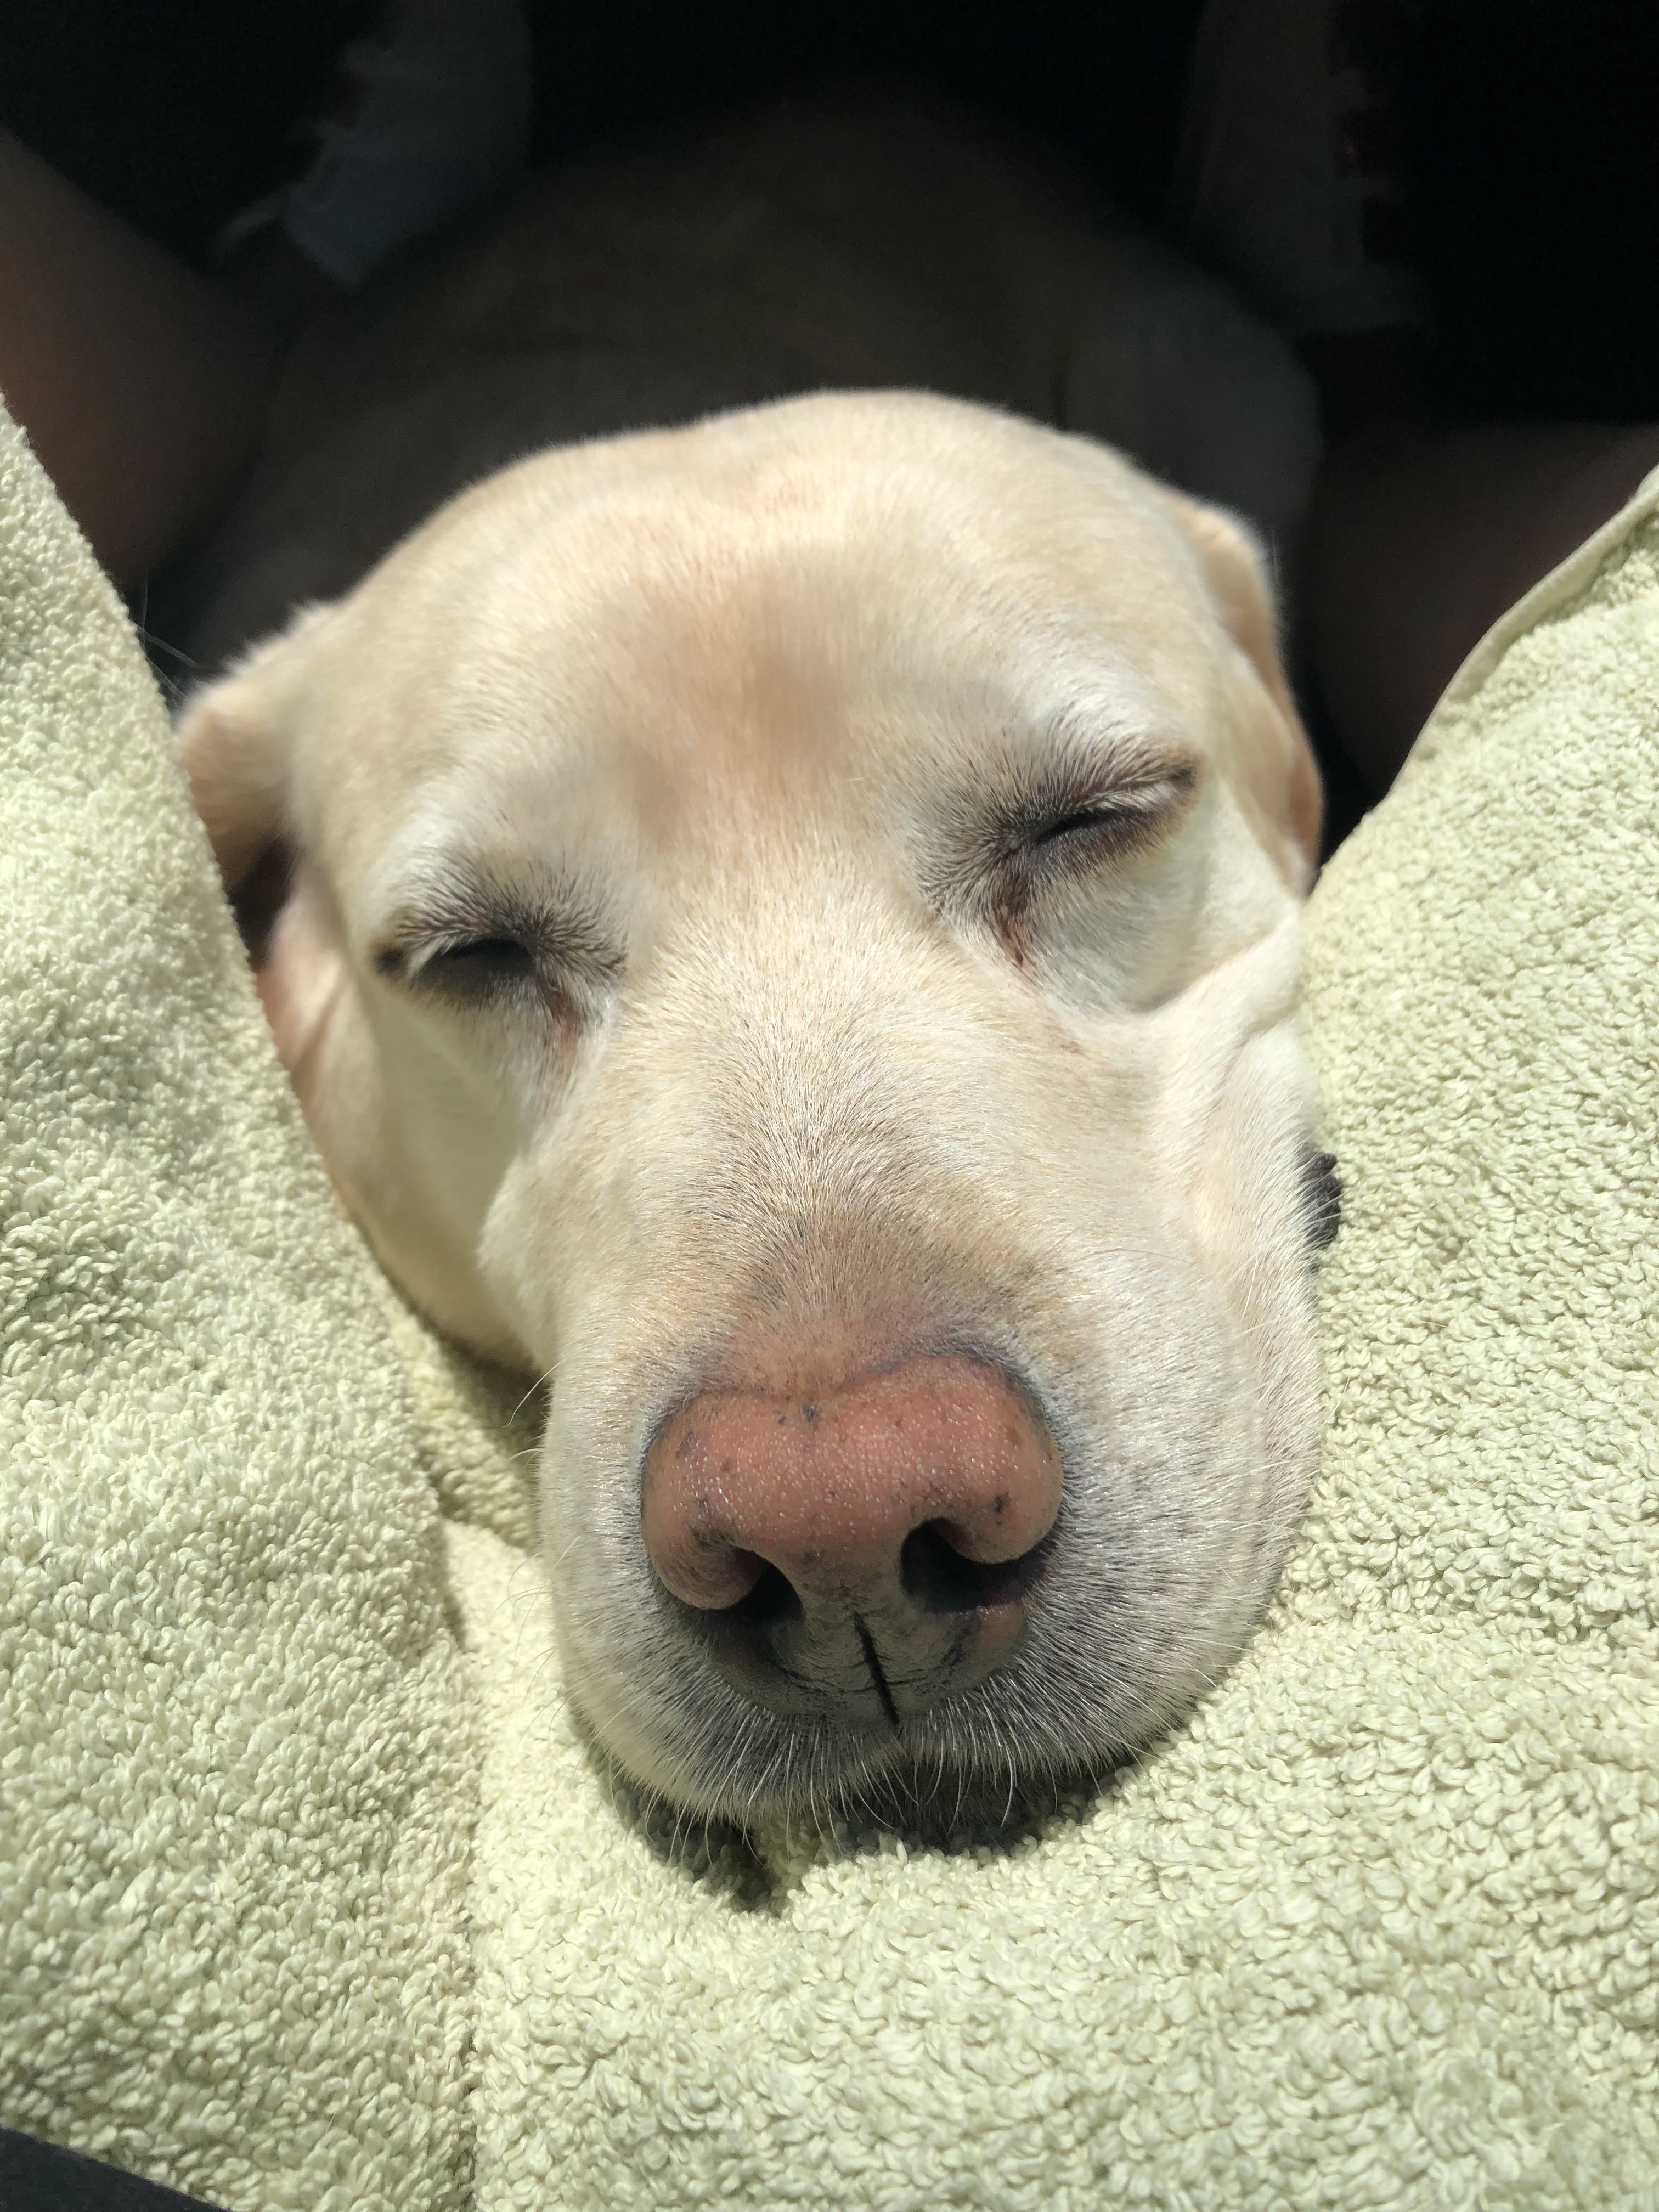 A Labrador lying on the bed with its face under the sun